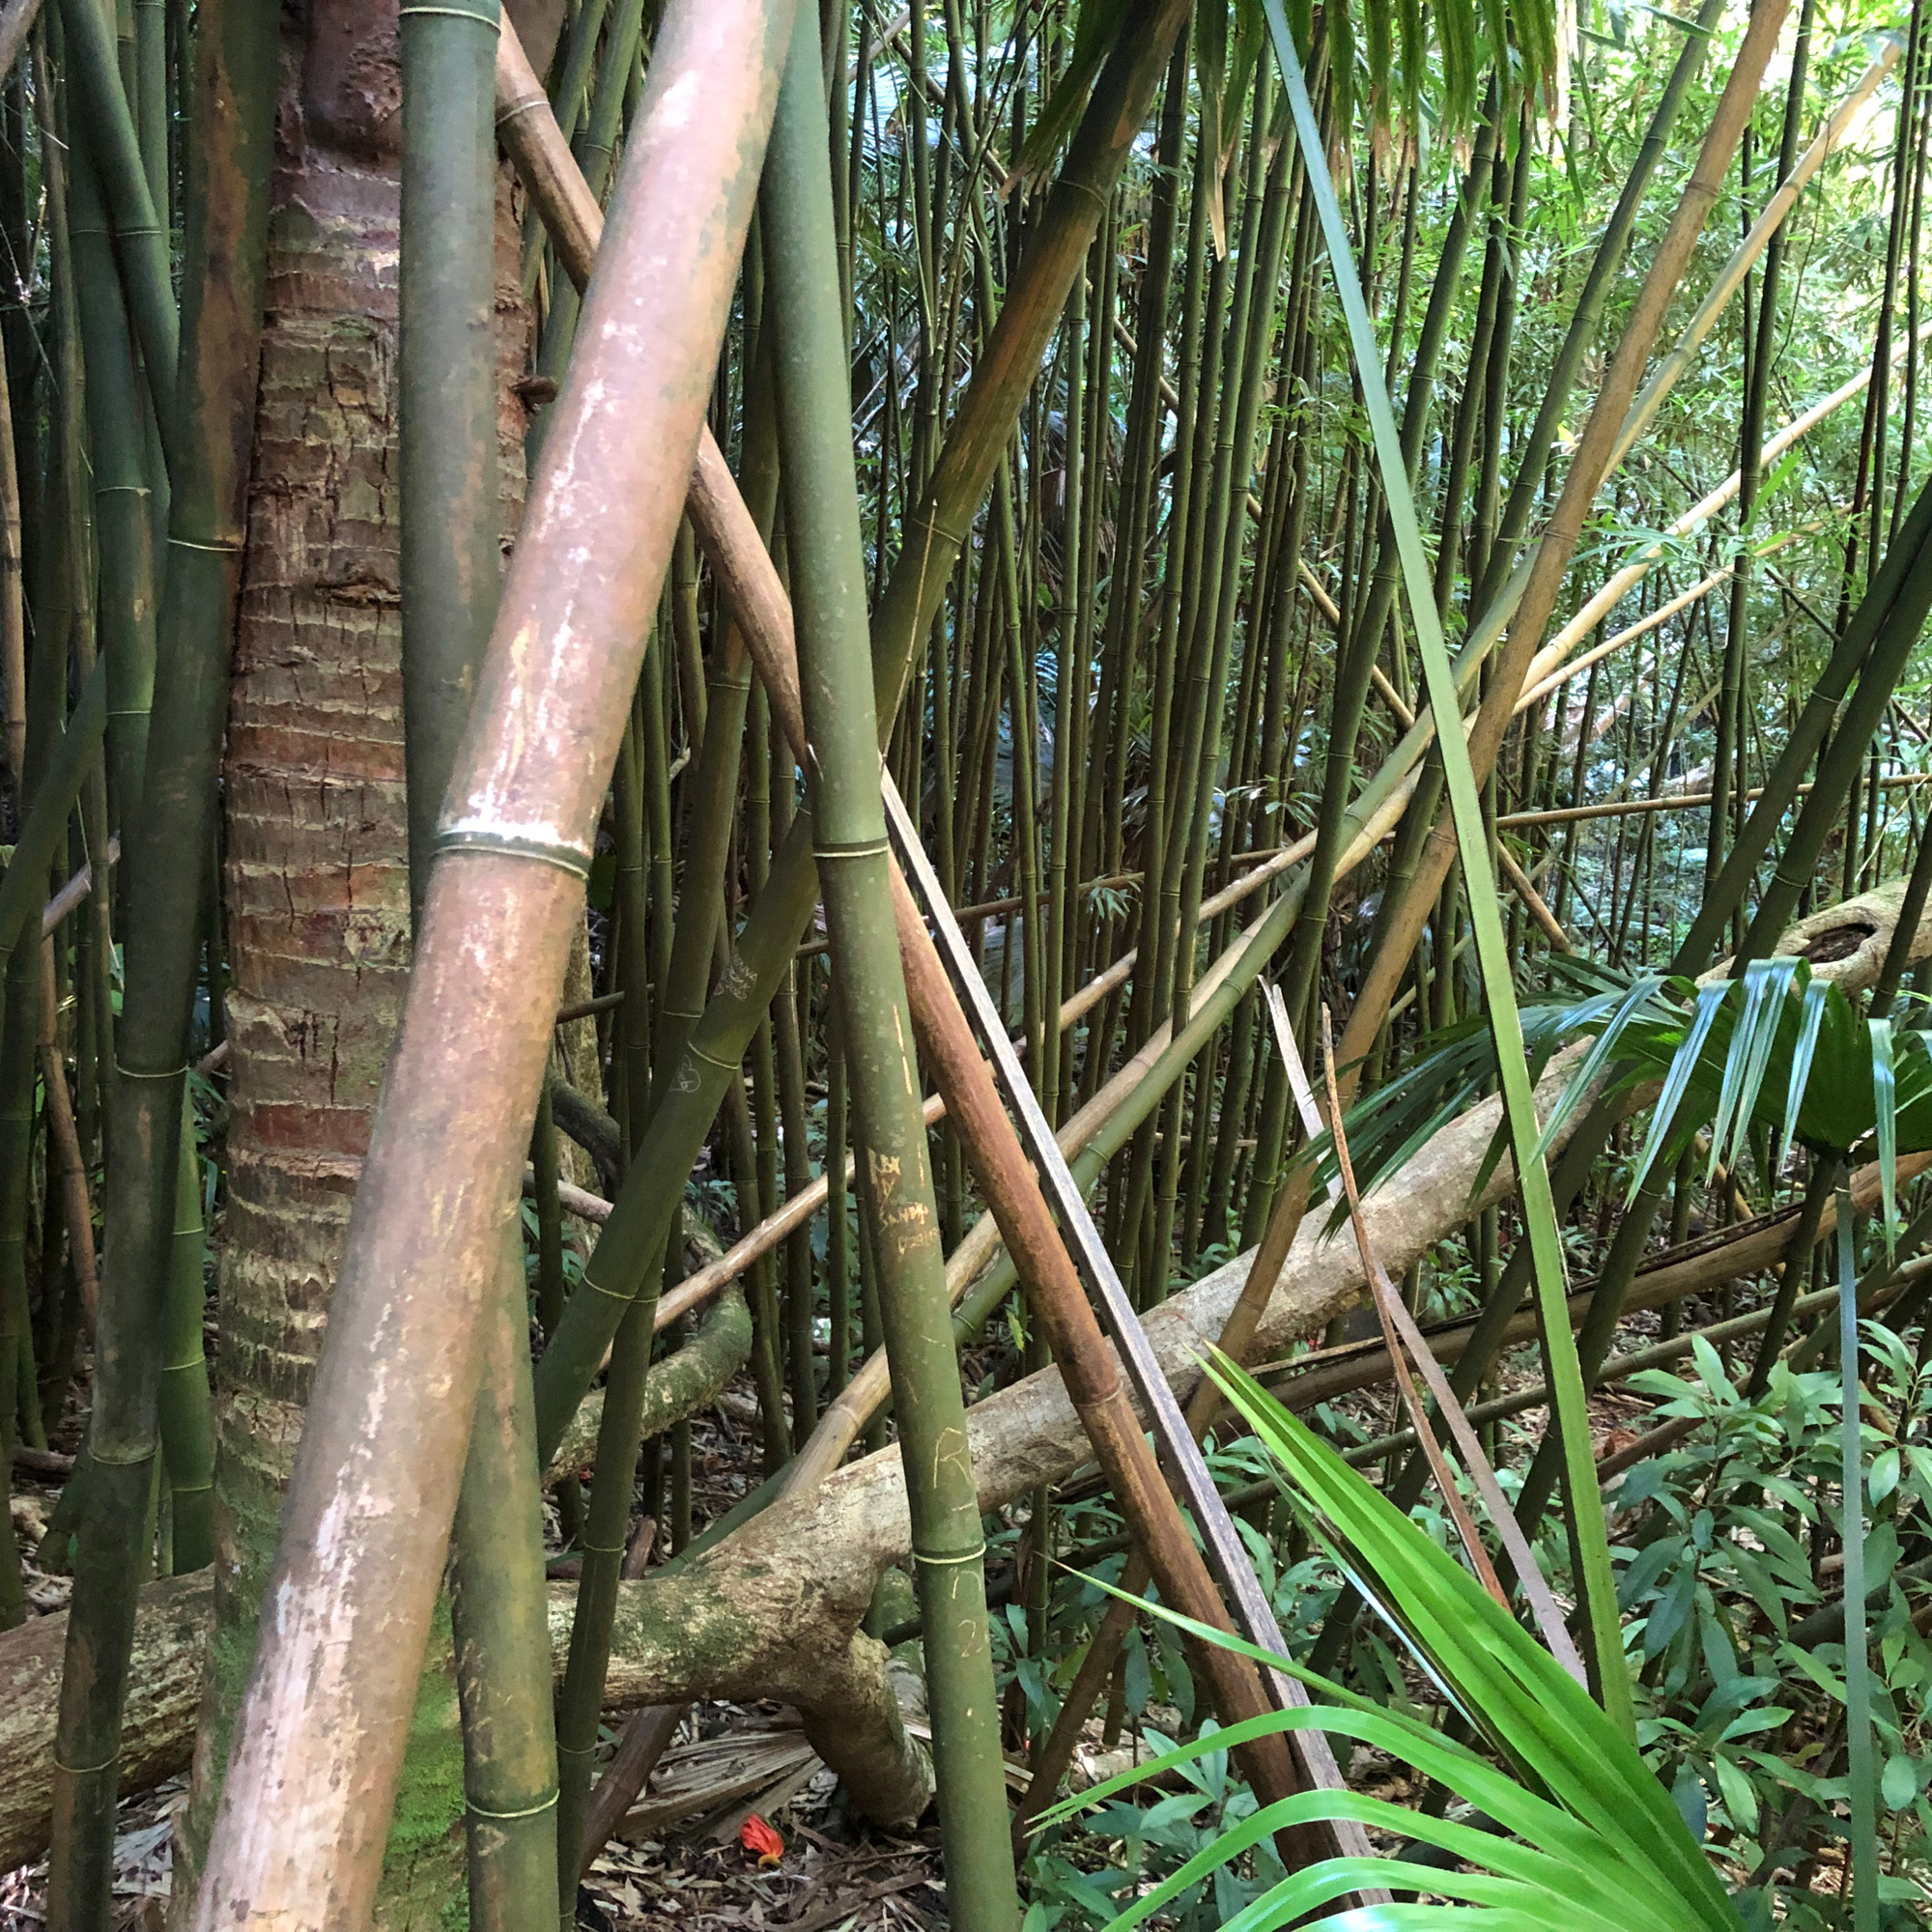 Bamboo forest in Manoa Valley, Oahu